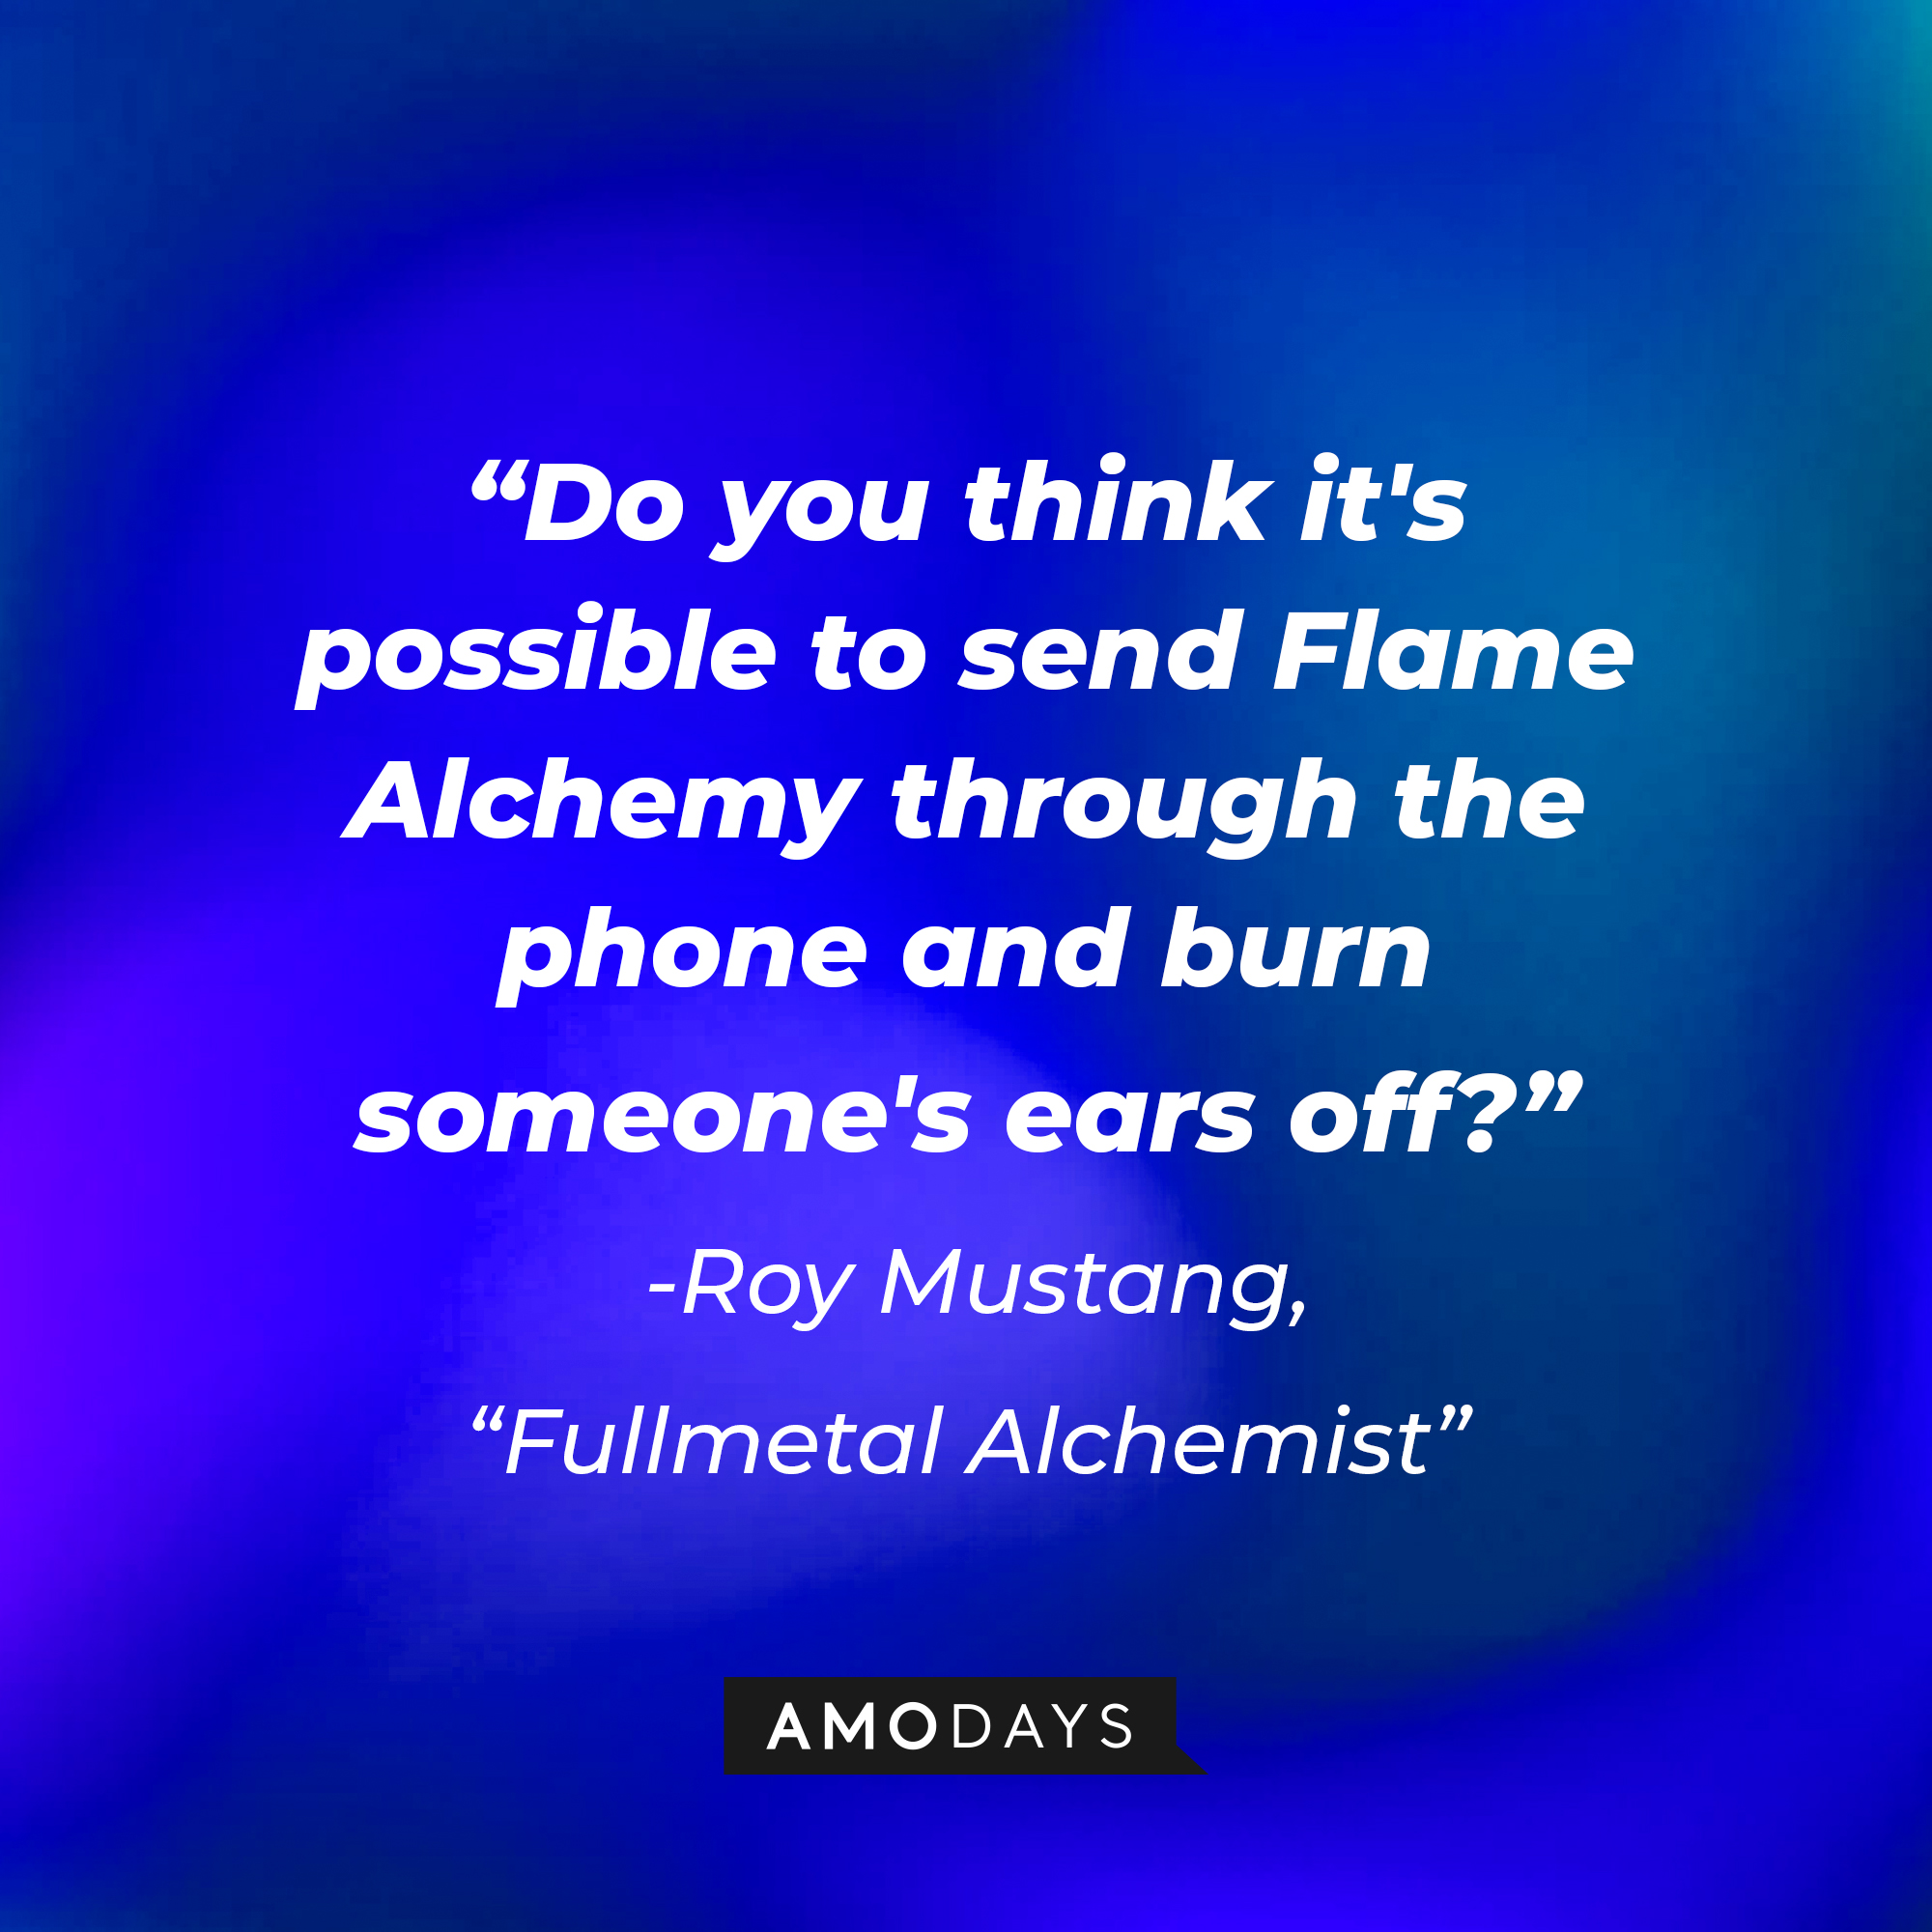 Roy Mustang's quote: "Do you think it's possible to send Flame Alchemy through the phone and burn someone's ears off?" | Image: Amodays